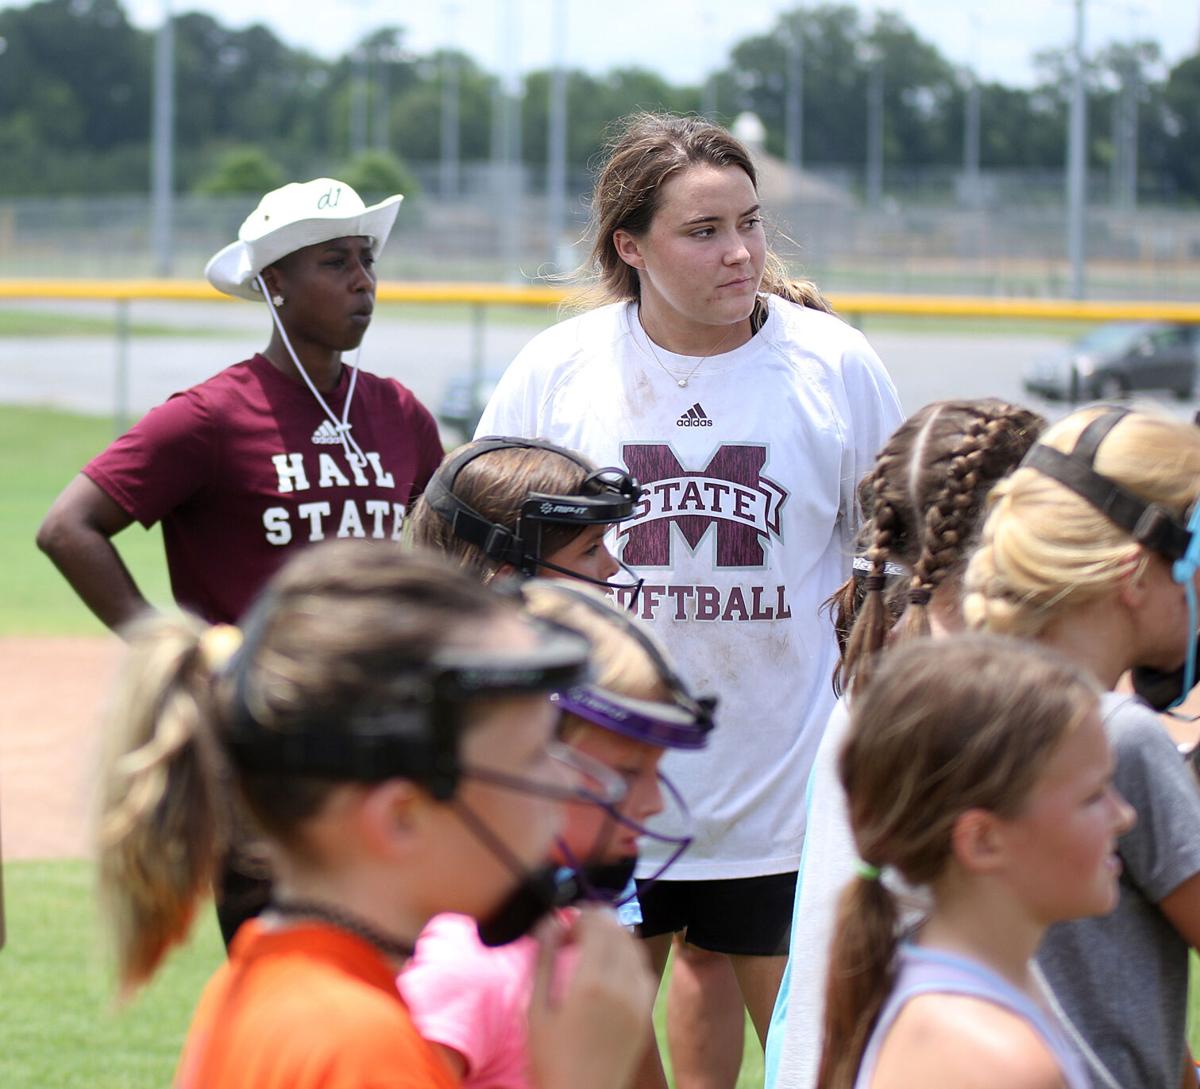 Dabbs Gives Back To Hometown With Softball Camp Featuring Former Msu Players Sports Meridianstar Com